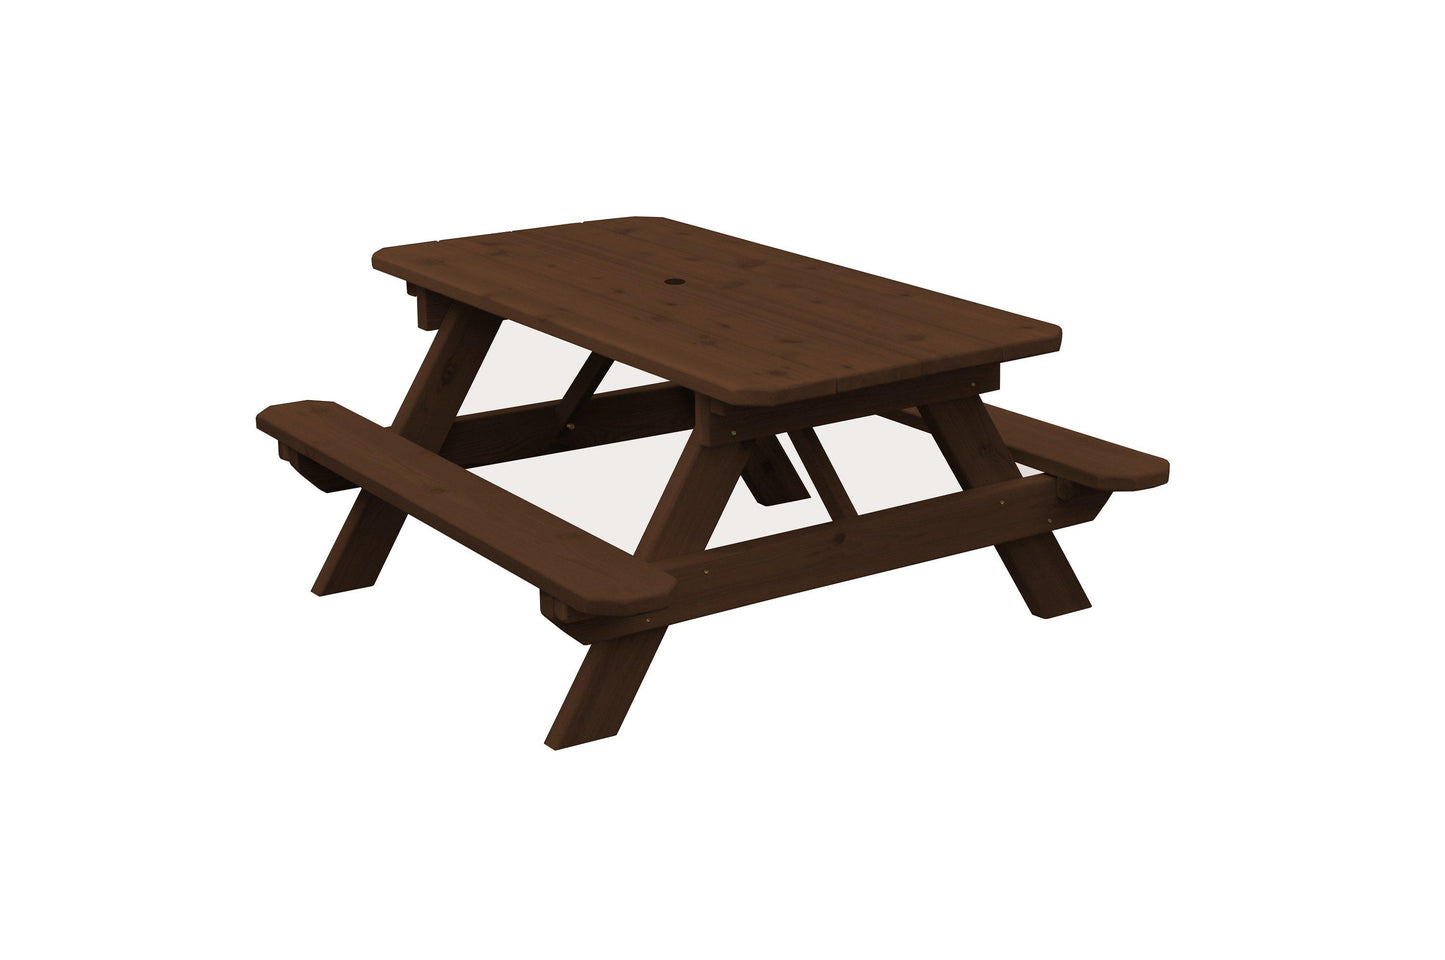 A&L FURNITURE CO. Western Red Cedar Kid's Table (22" Wide)- Specify for FREE 2" Umbrella Hole - LEAD TIME TO SHIP 4 WEEKS OR LESS